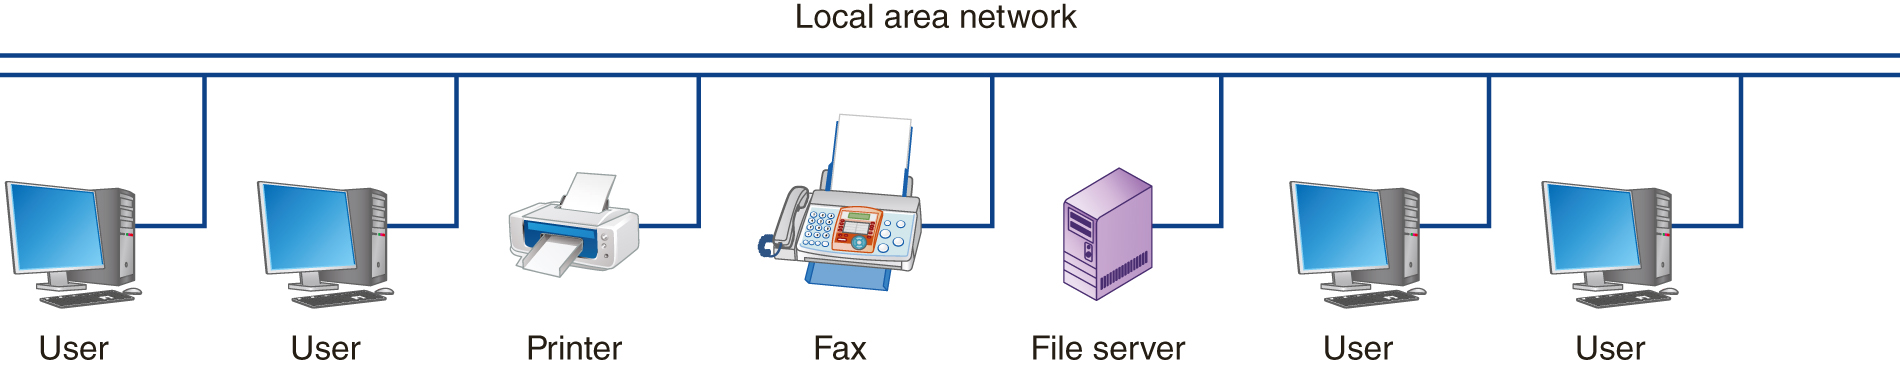 An illustration shows four users, a printer, a fax machine, and a file server all connected in a local area network.
